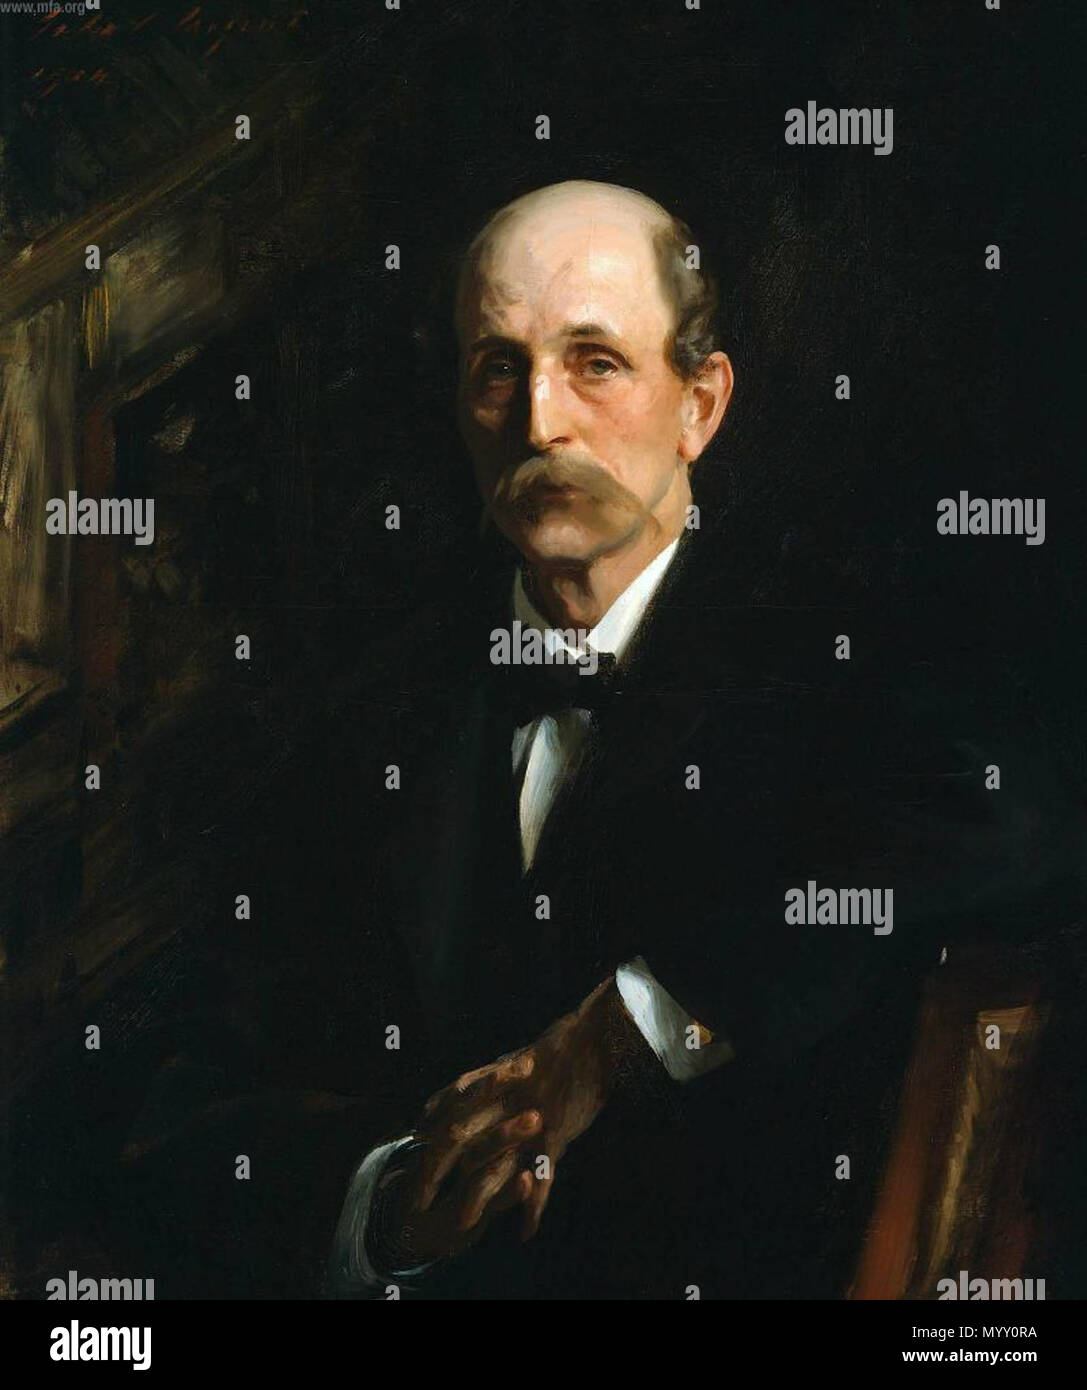 . English: General Charles J. Paine John Singer Sargent -- American painter 1904 Museum of Fine Arts, Boston Oil on canvas 86.68 x 72.71 cm (34 1/8 x 28 5/8 in.) Gift of the heirs of Charles J. Paine 54.1410 Jpg: MFA  . 1904. John Singer Sargent Born: January 12, 1856, Florence Died: April 14, 1925, London, United Kingdom 39 General Charles J. Paine Stock Photo